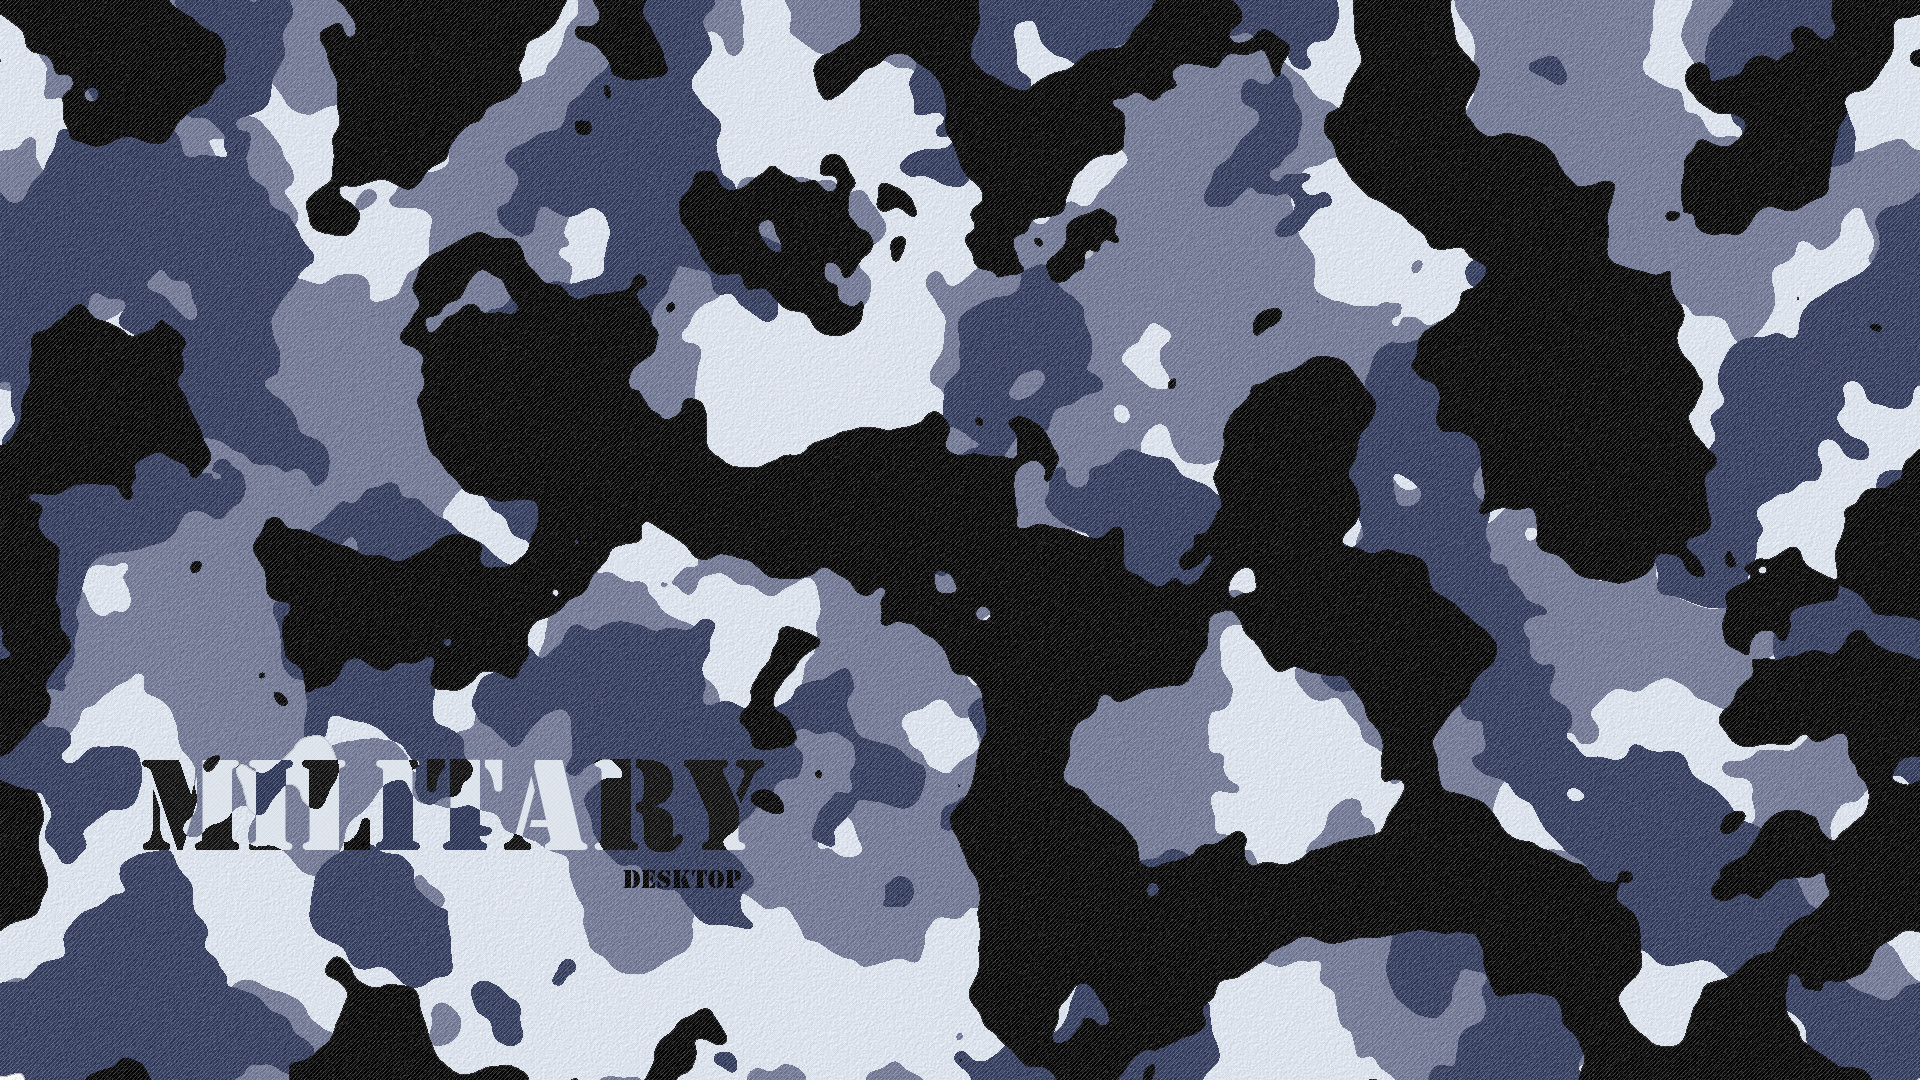 1920x1080 Military Camo Contrast Weapons Warriors Soldiers Abstract